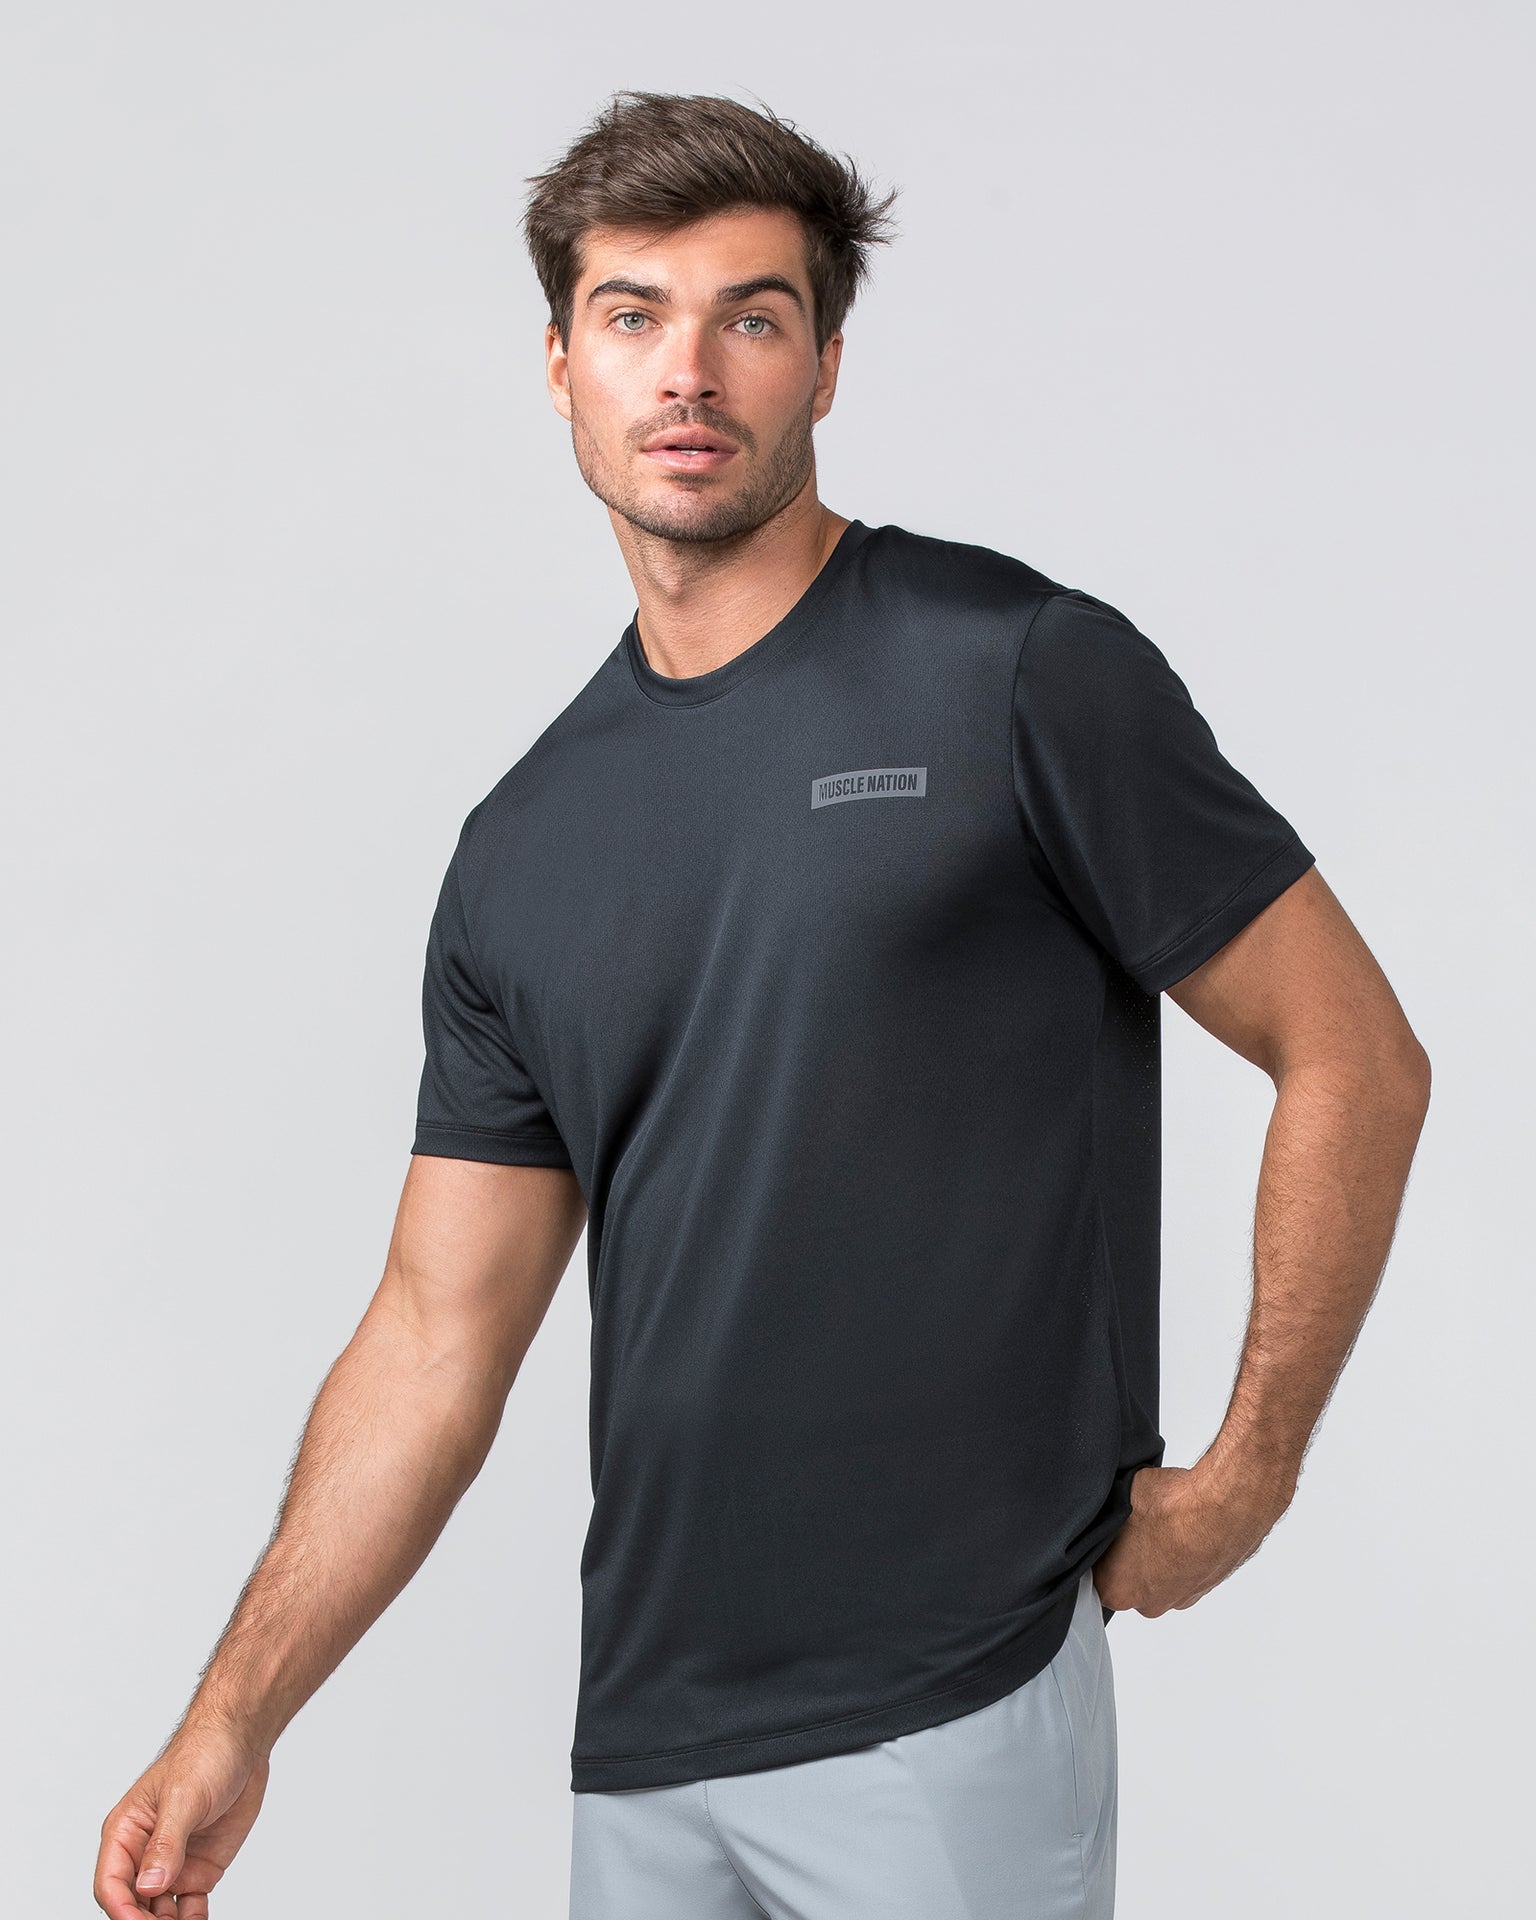 Muscle Nation T-Shirts Copy of Represent Oversized Tee - Black